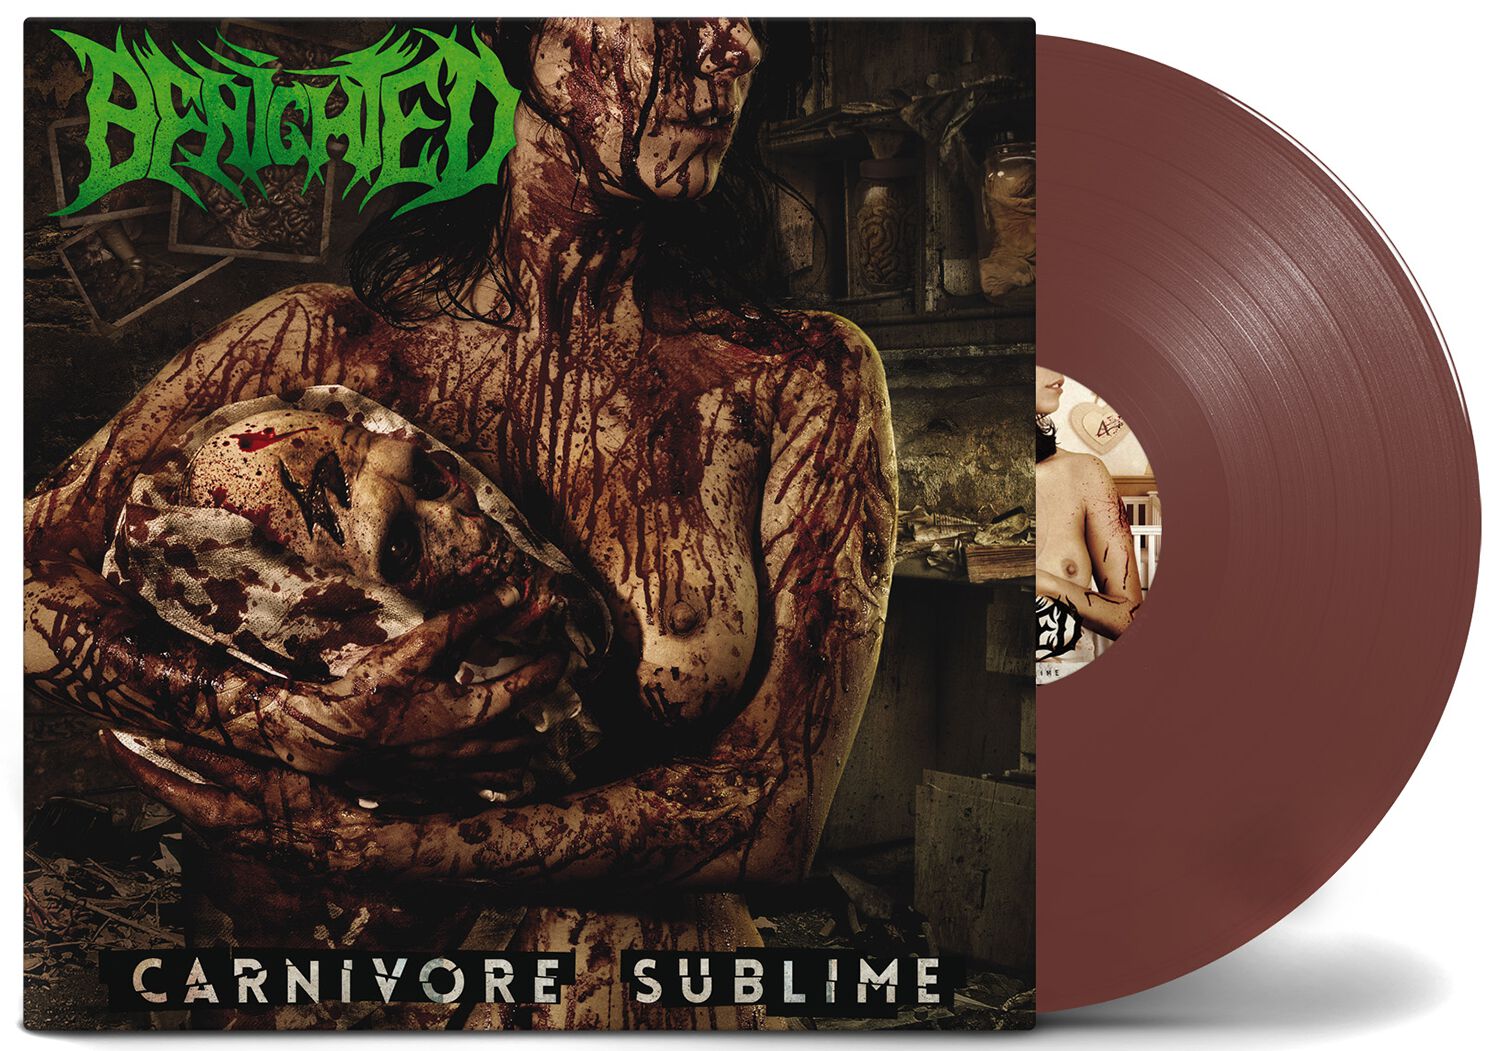 Image of Benighted Carnivore sublime LP braun